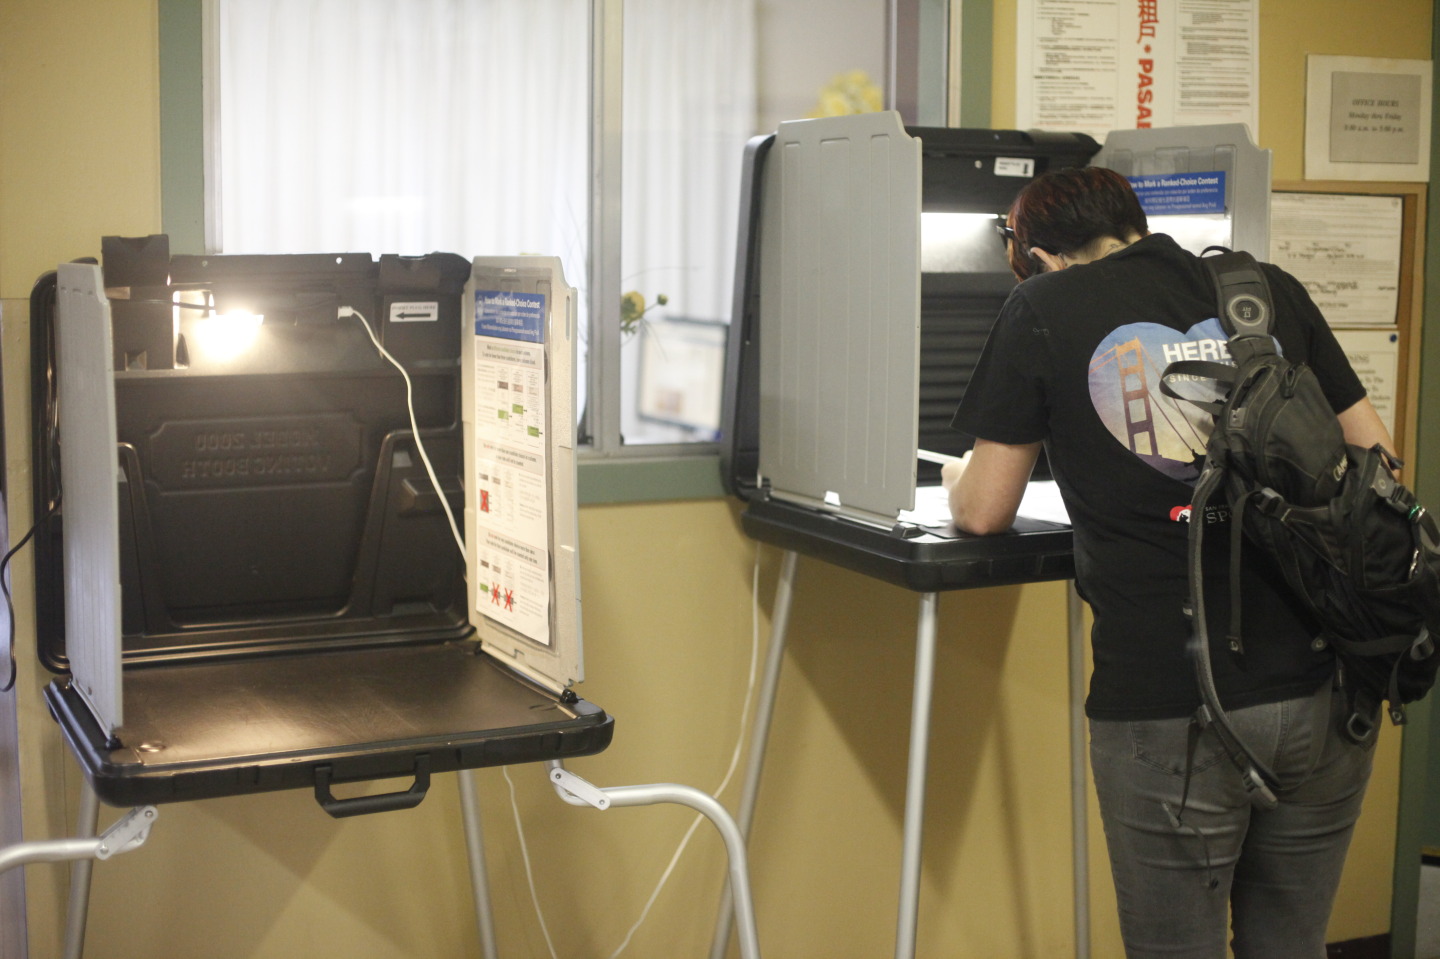 Lauren Taylor, 28, votes at her polling place on 36 Hoff St. in San Francisco's Mission District. (Katie Brigham/KQED)